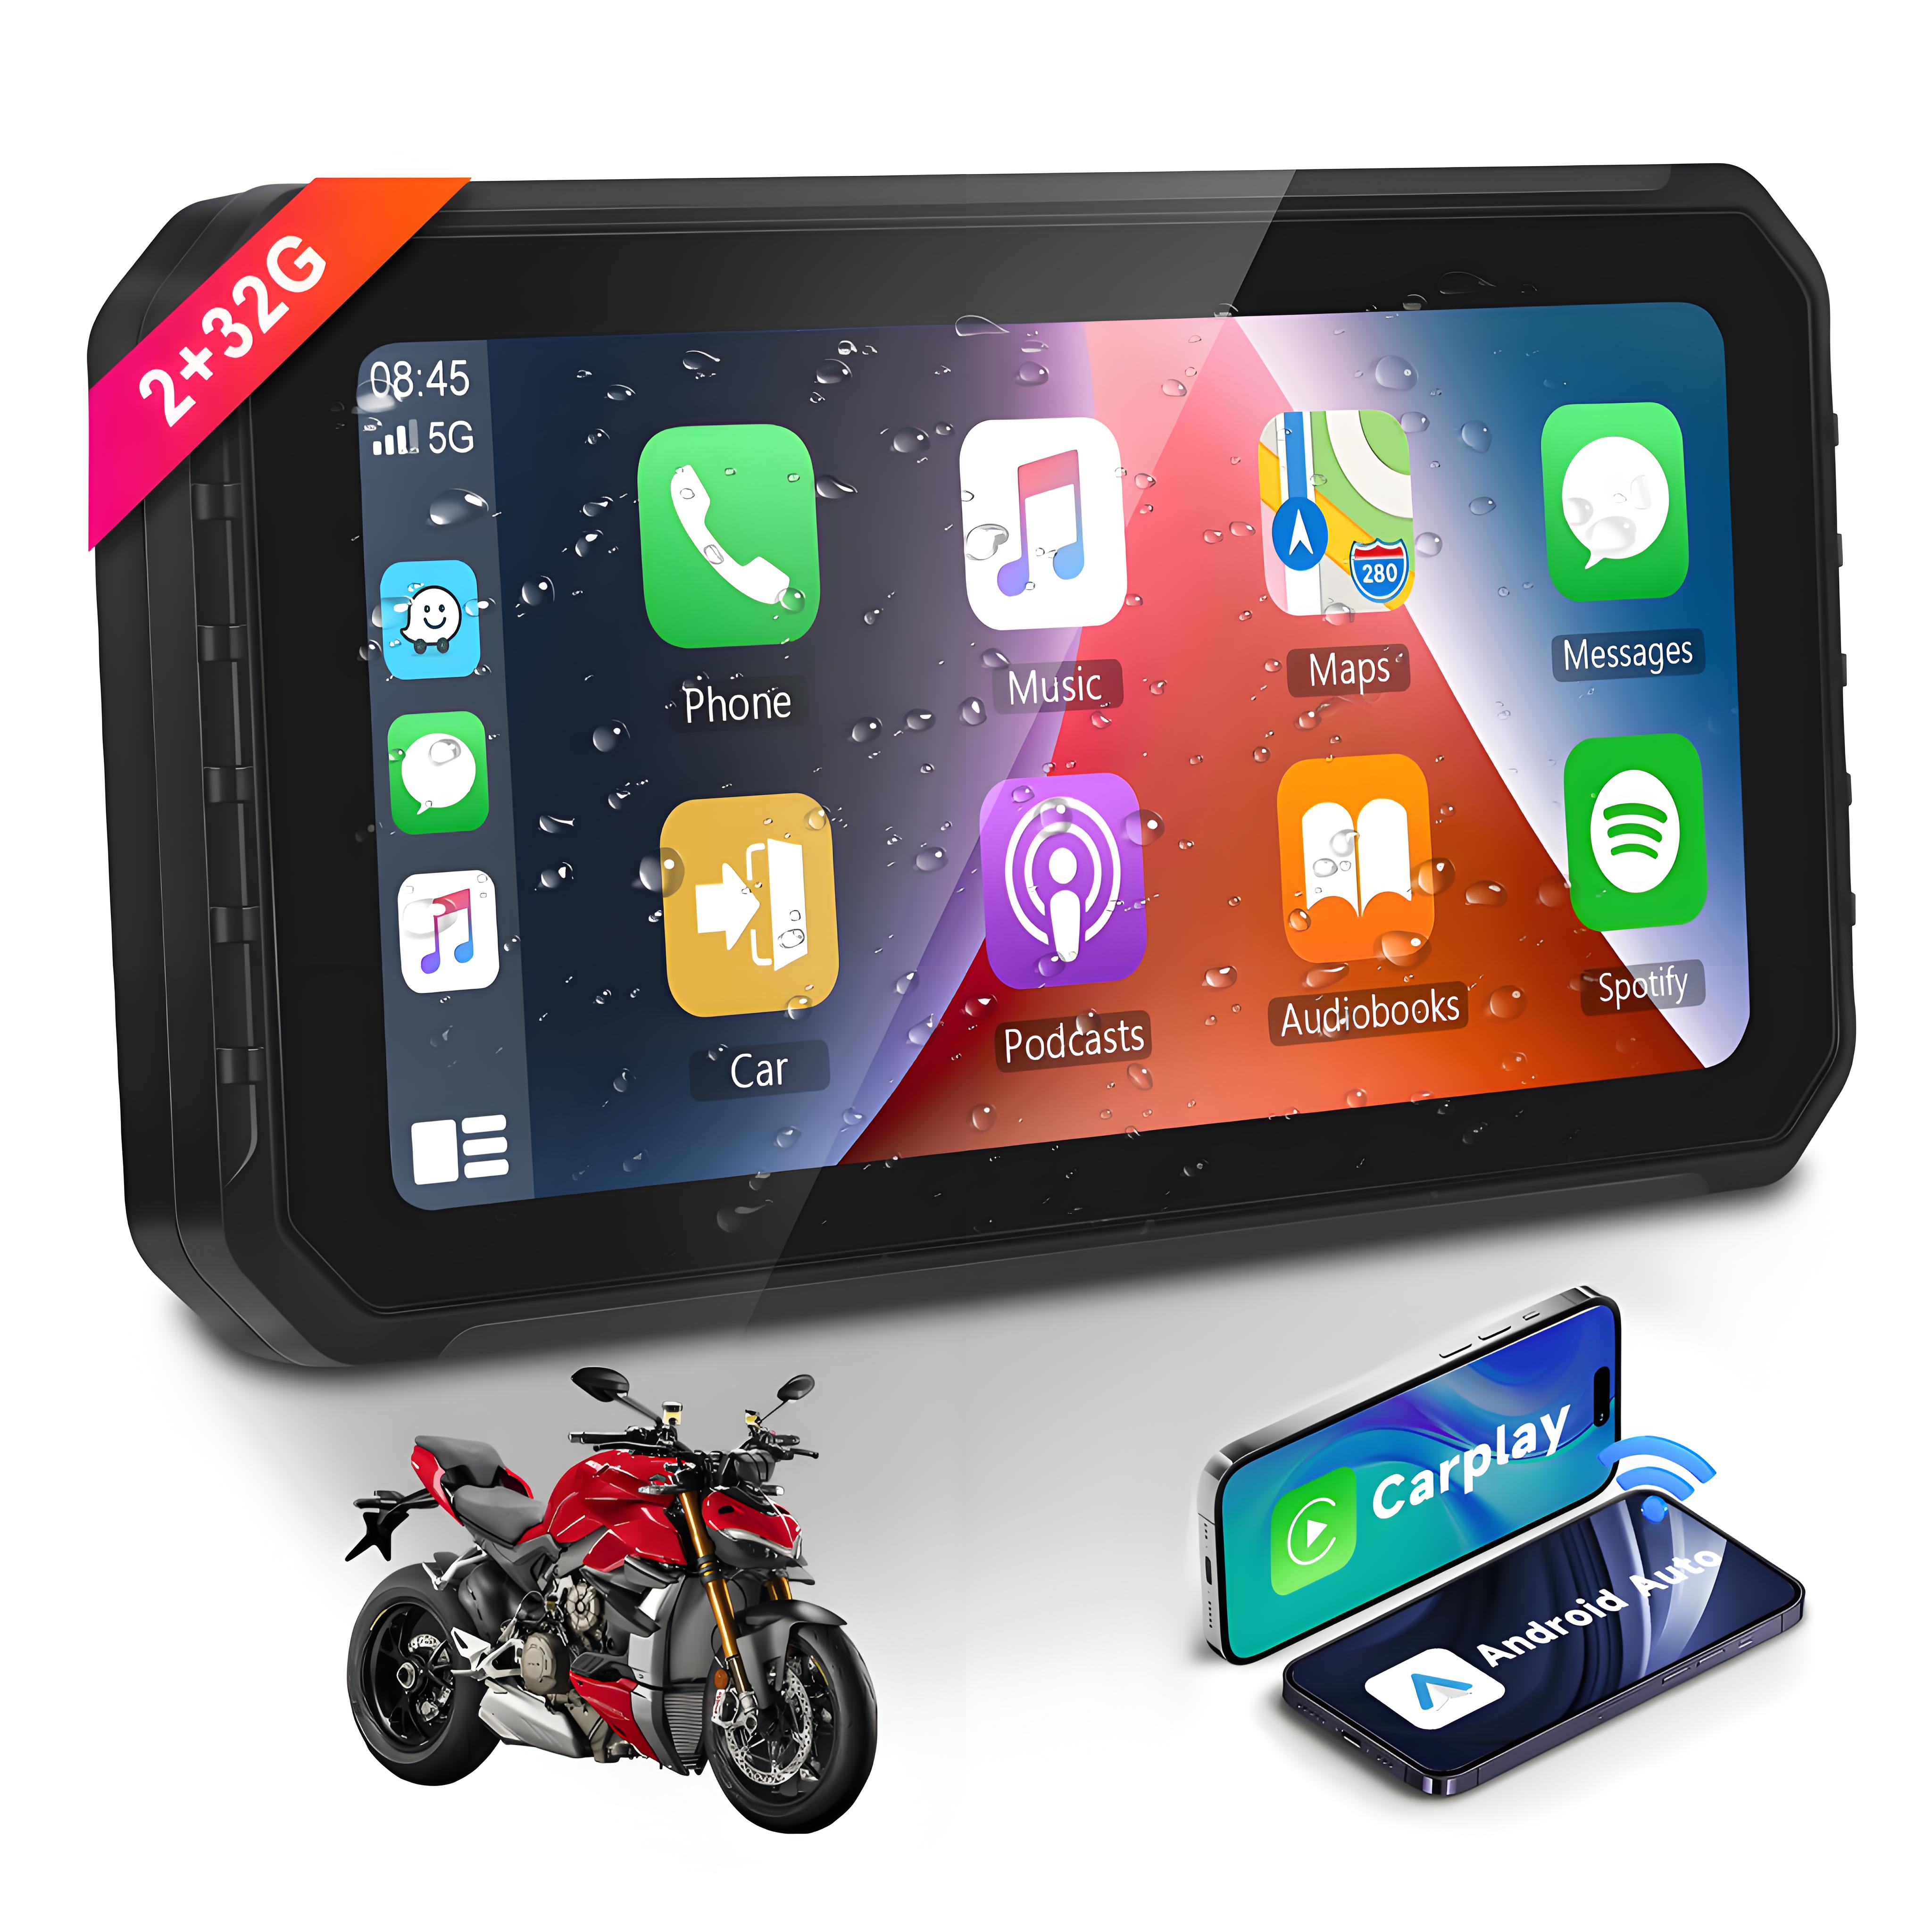 Zmecar 6.2-inch Android System 2+32GB Portable Motorcycle Carplay Support Wireless Carplay Android Auto WIFI Bluetooth  Aux  TF Card  GPS Navigation